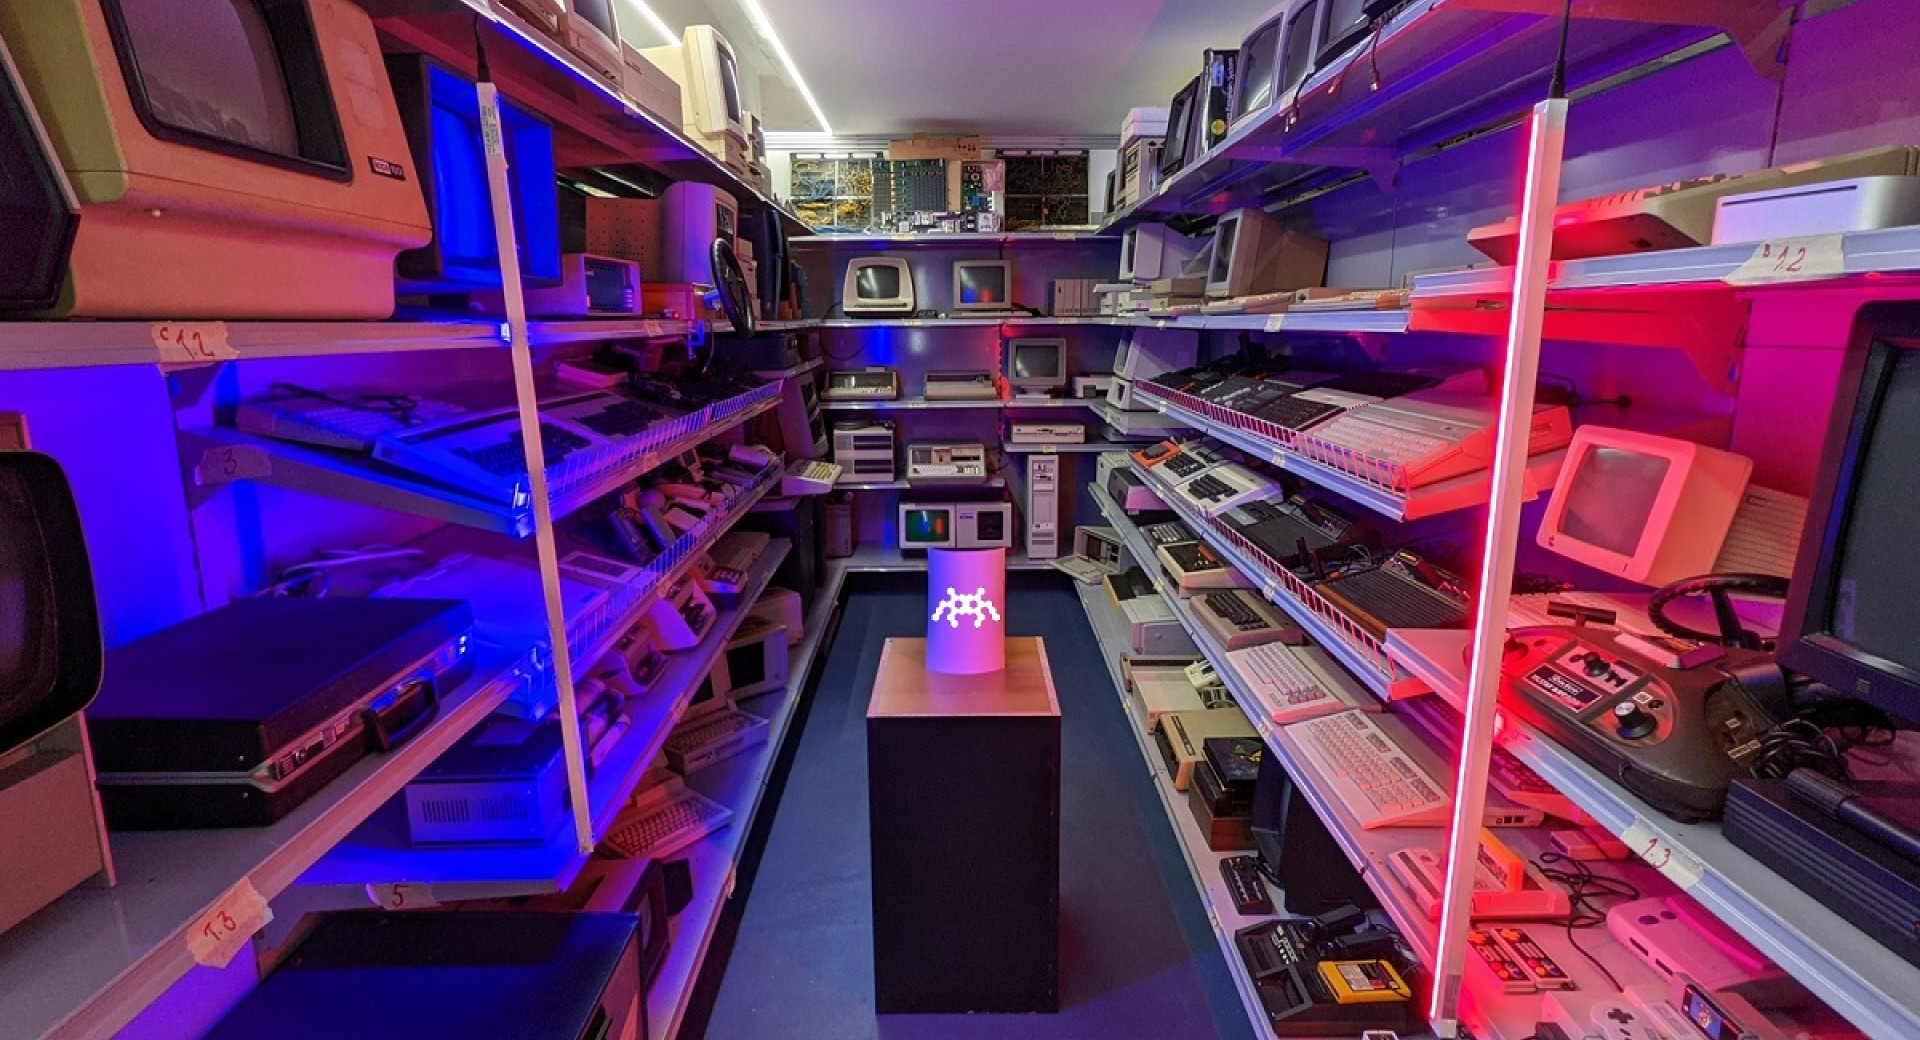 Shelves with retro computers, lit with pink light.